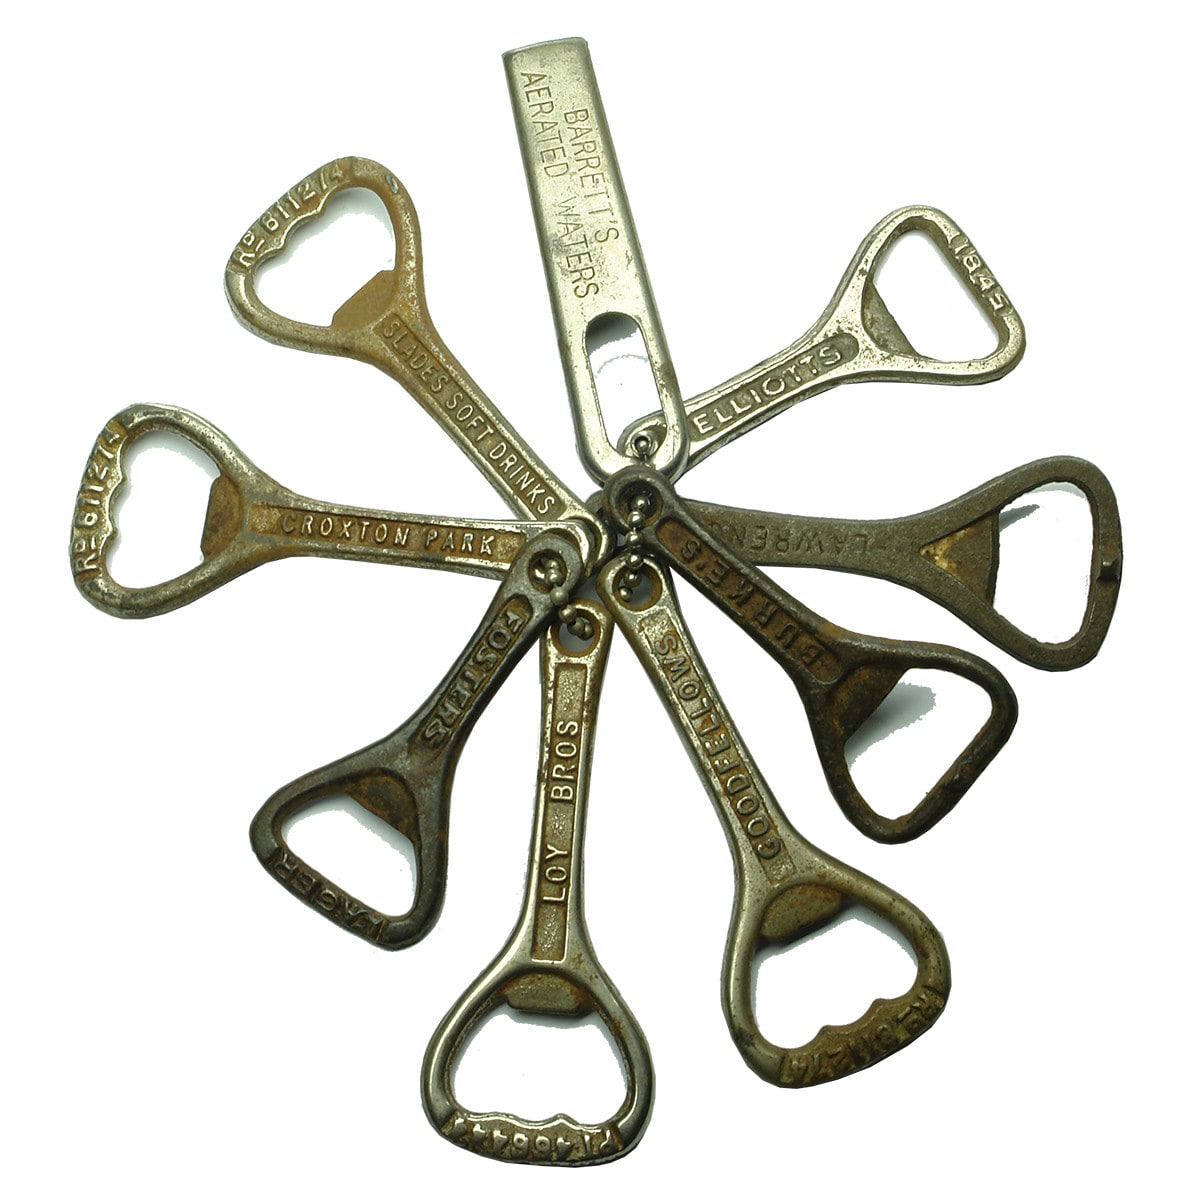 9 x crown seal openers: Barrett's Aerated Waters (plus internal thread opener); Eillott's Dry Ginger; Lawrence; Slades; Croxton Park Hotel; Abbot's/Foster's; Loy Bros., Melbourne; Goodfellow's (Ballarat); Burke's Guinness.